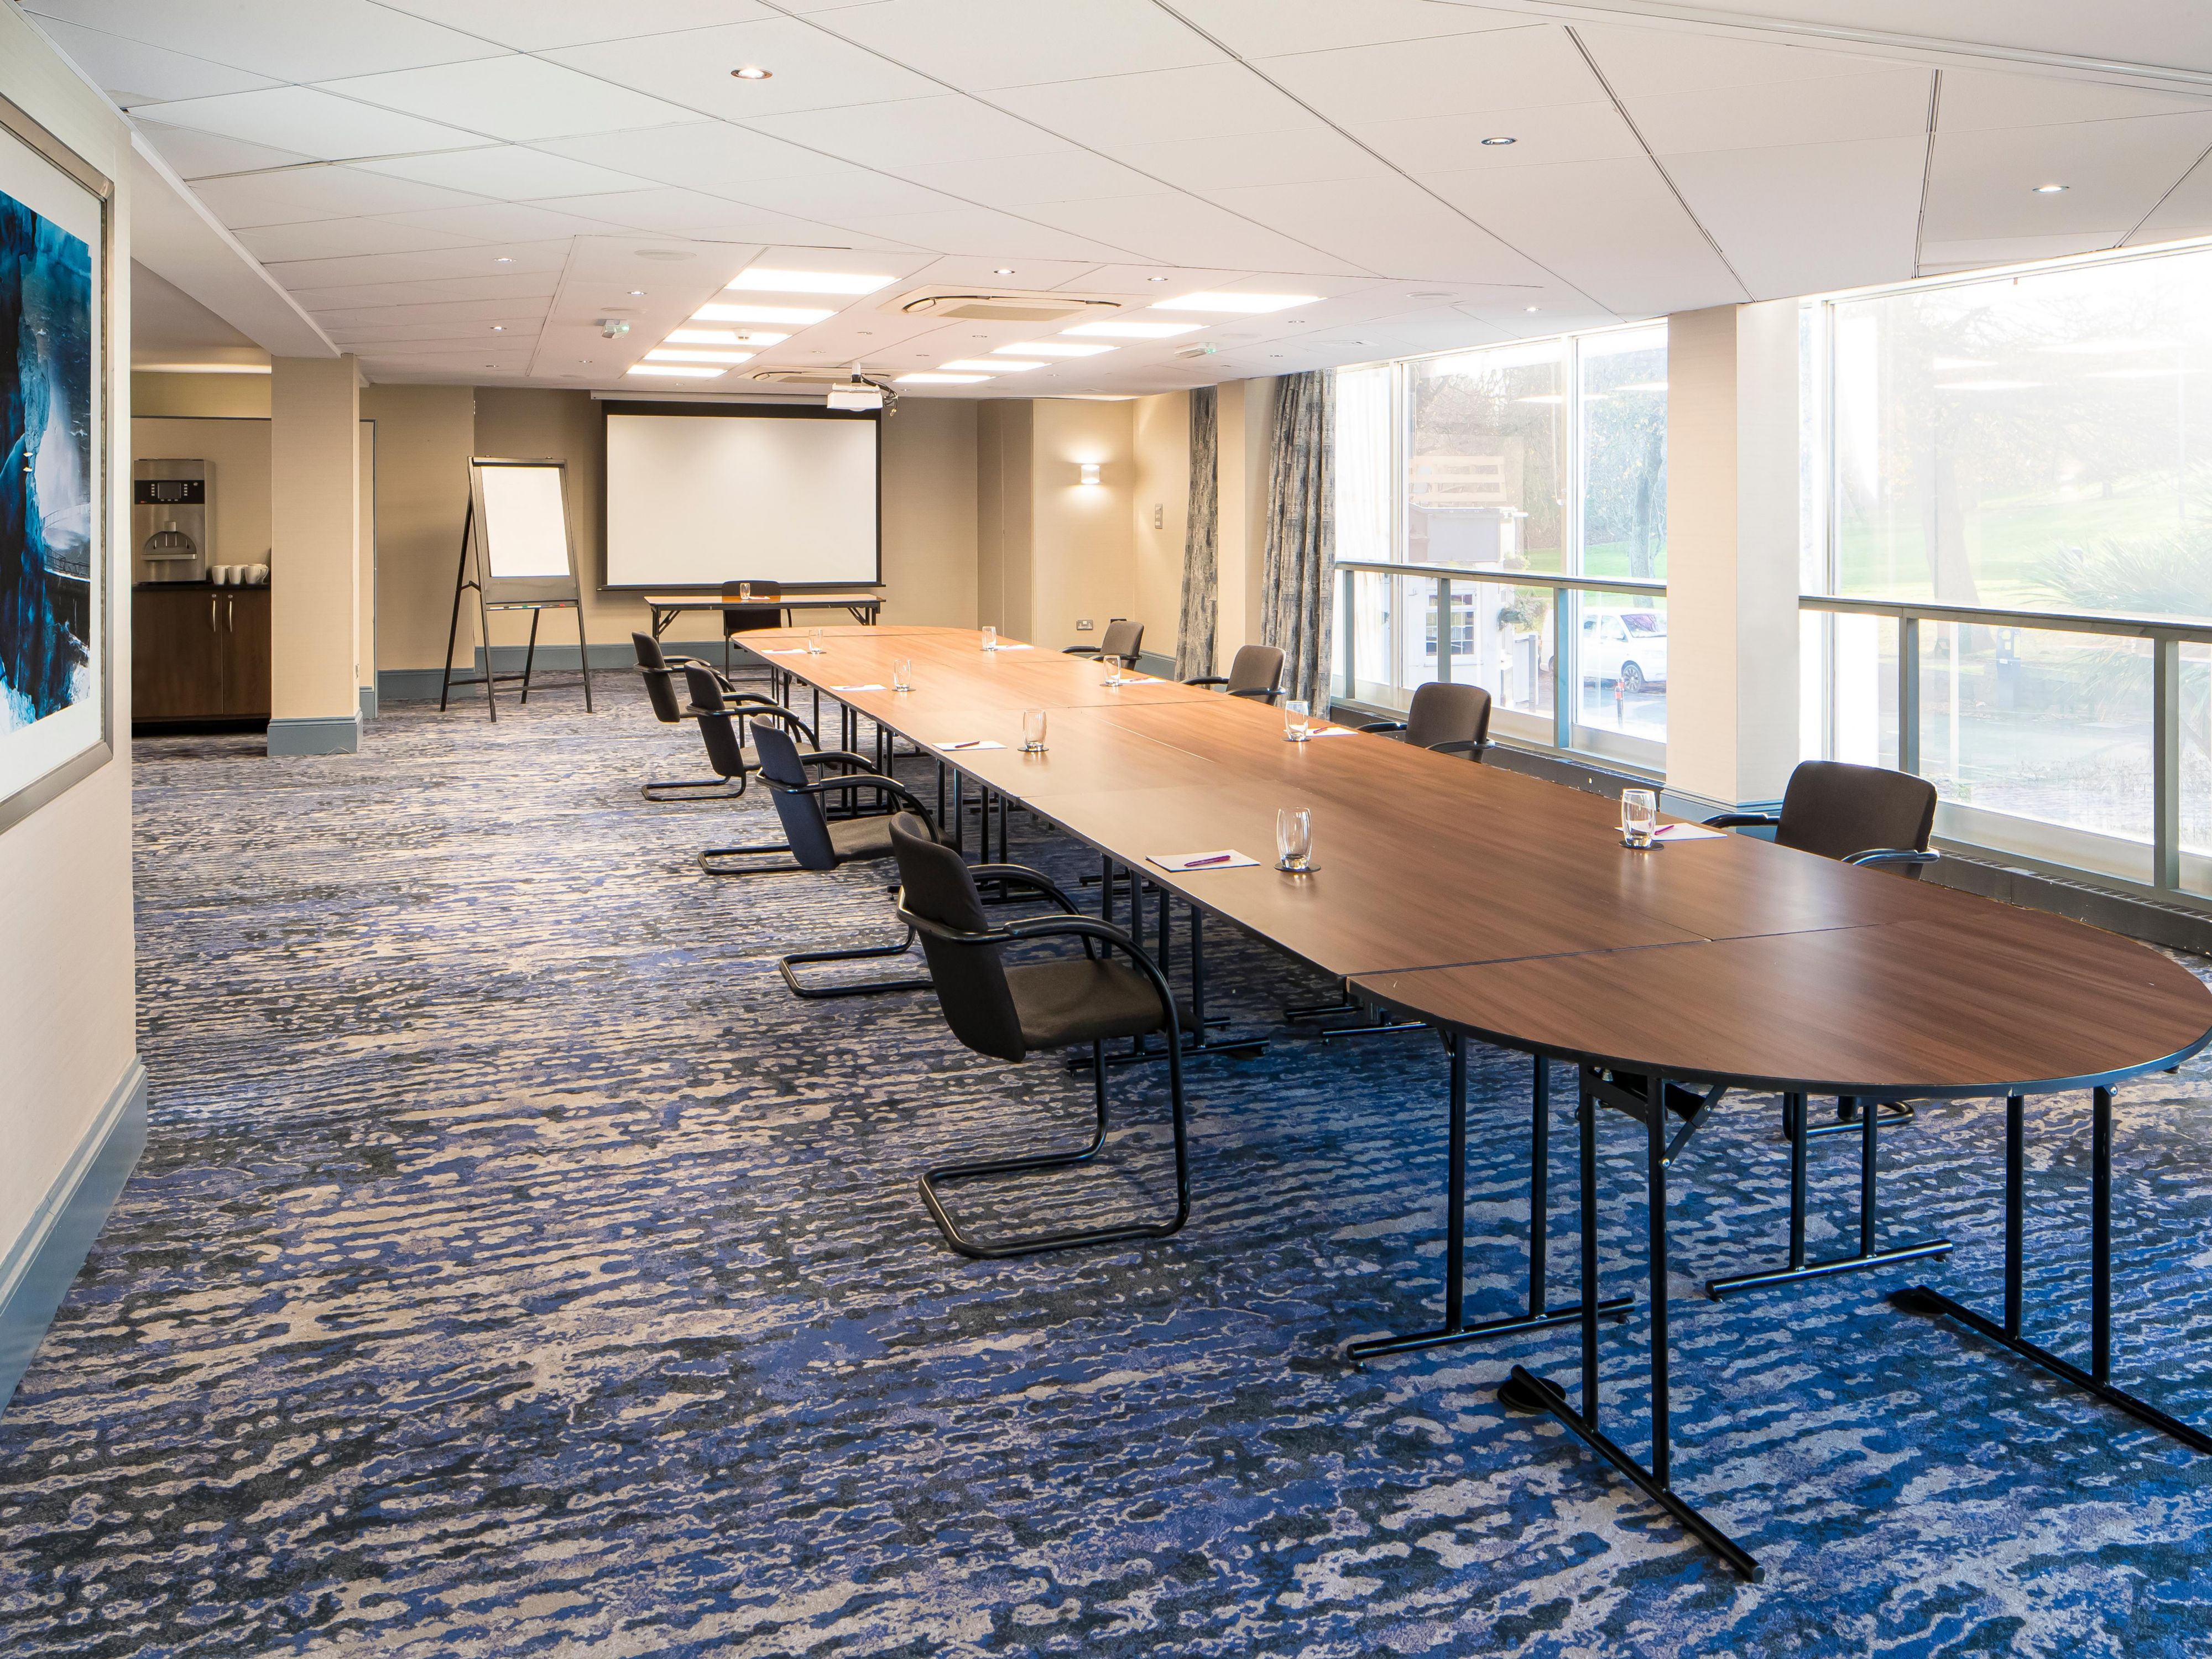 Get more from your meeting with a complimentary ‘unique experience’ when you book a day delegate package for 10 or more people. The hotel offers 6 fully equipped meeting spaces for up to 500 guests, with a dedicated meetings director, a conference café and food and drink options to match your requirements. 
